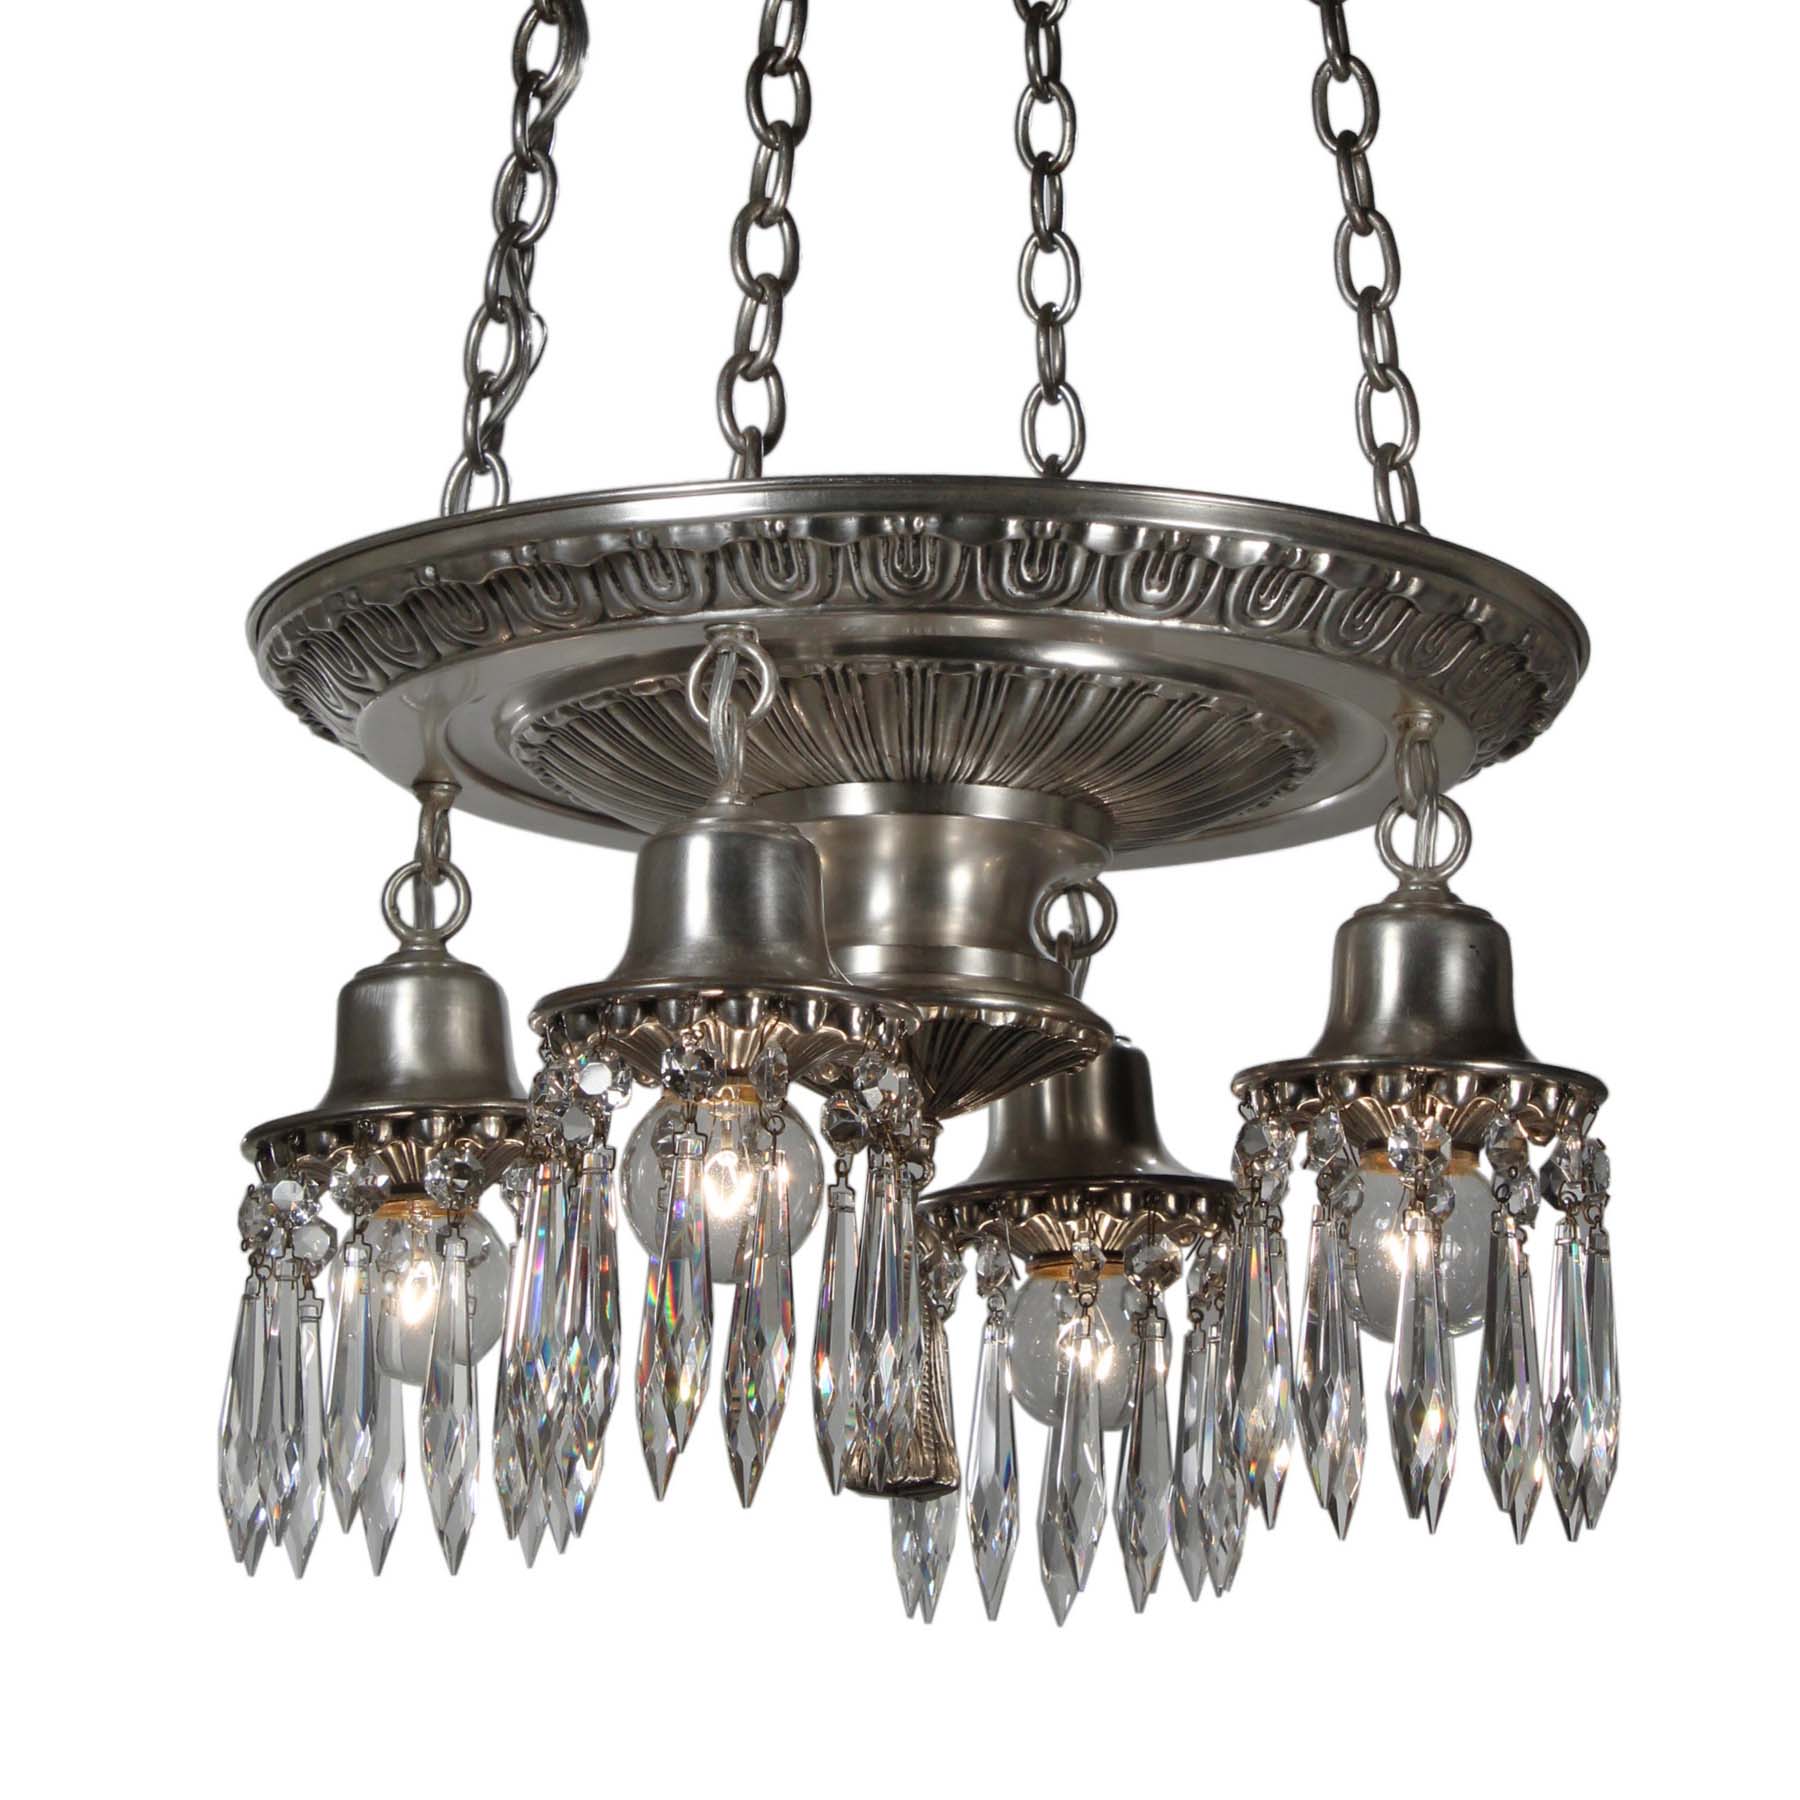 SOLD Neoclassical Silver Plated Chandelier with Prisms, Antique Lighting-0